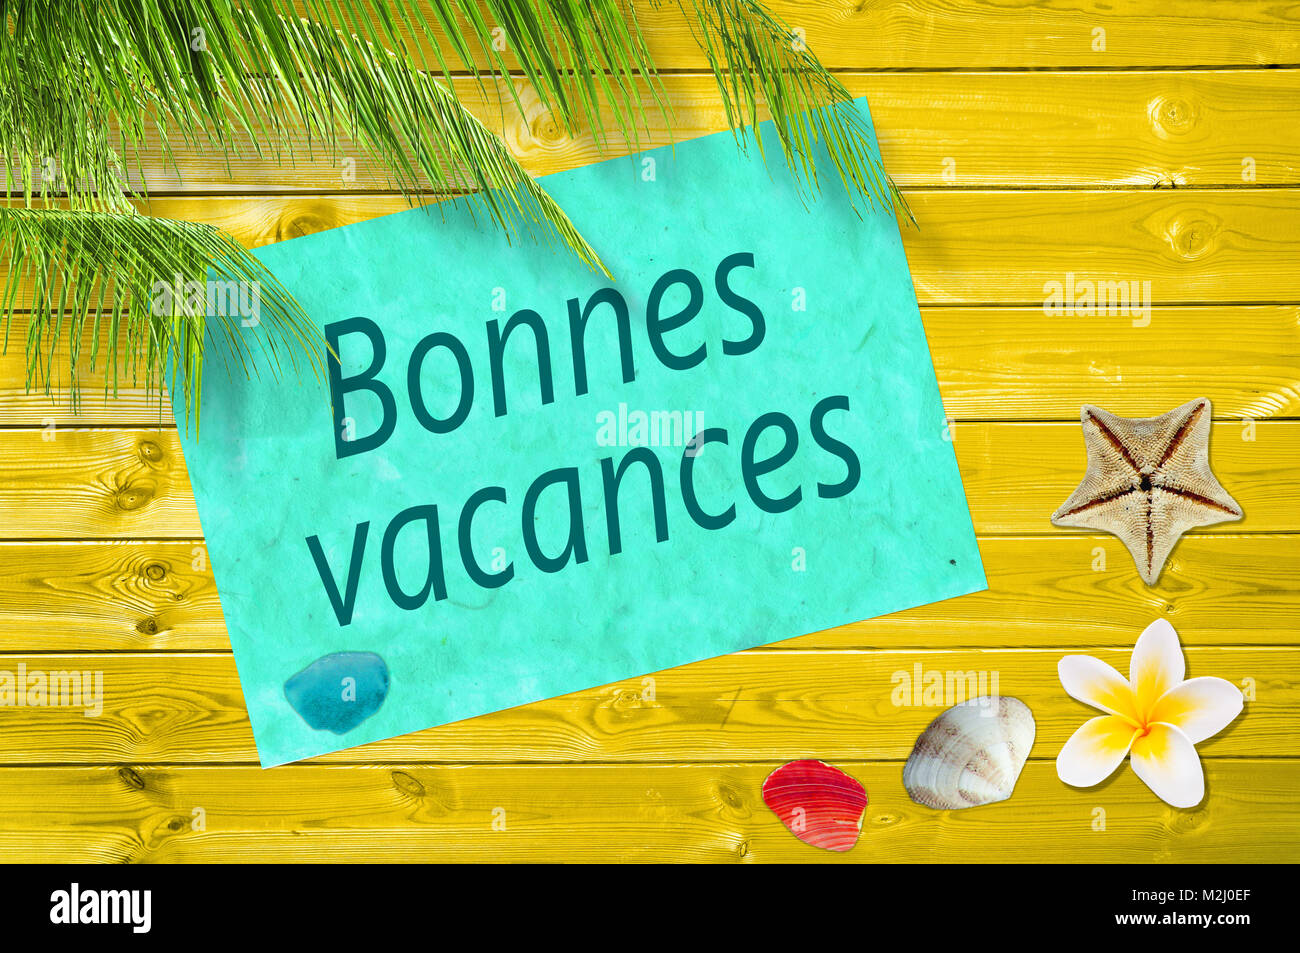 Bonnes vacances (meaning happy summer) written on a paper on colorful wood background with palm trees and sea shells Stock Photo